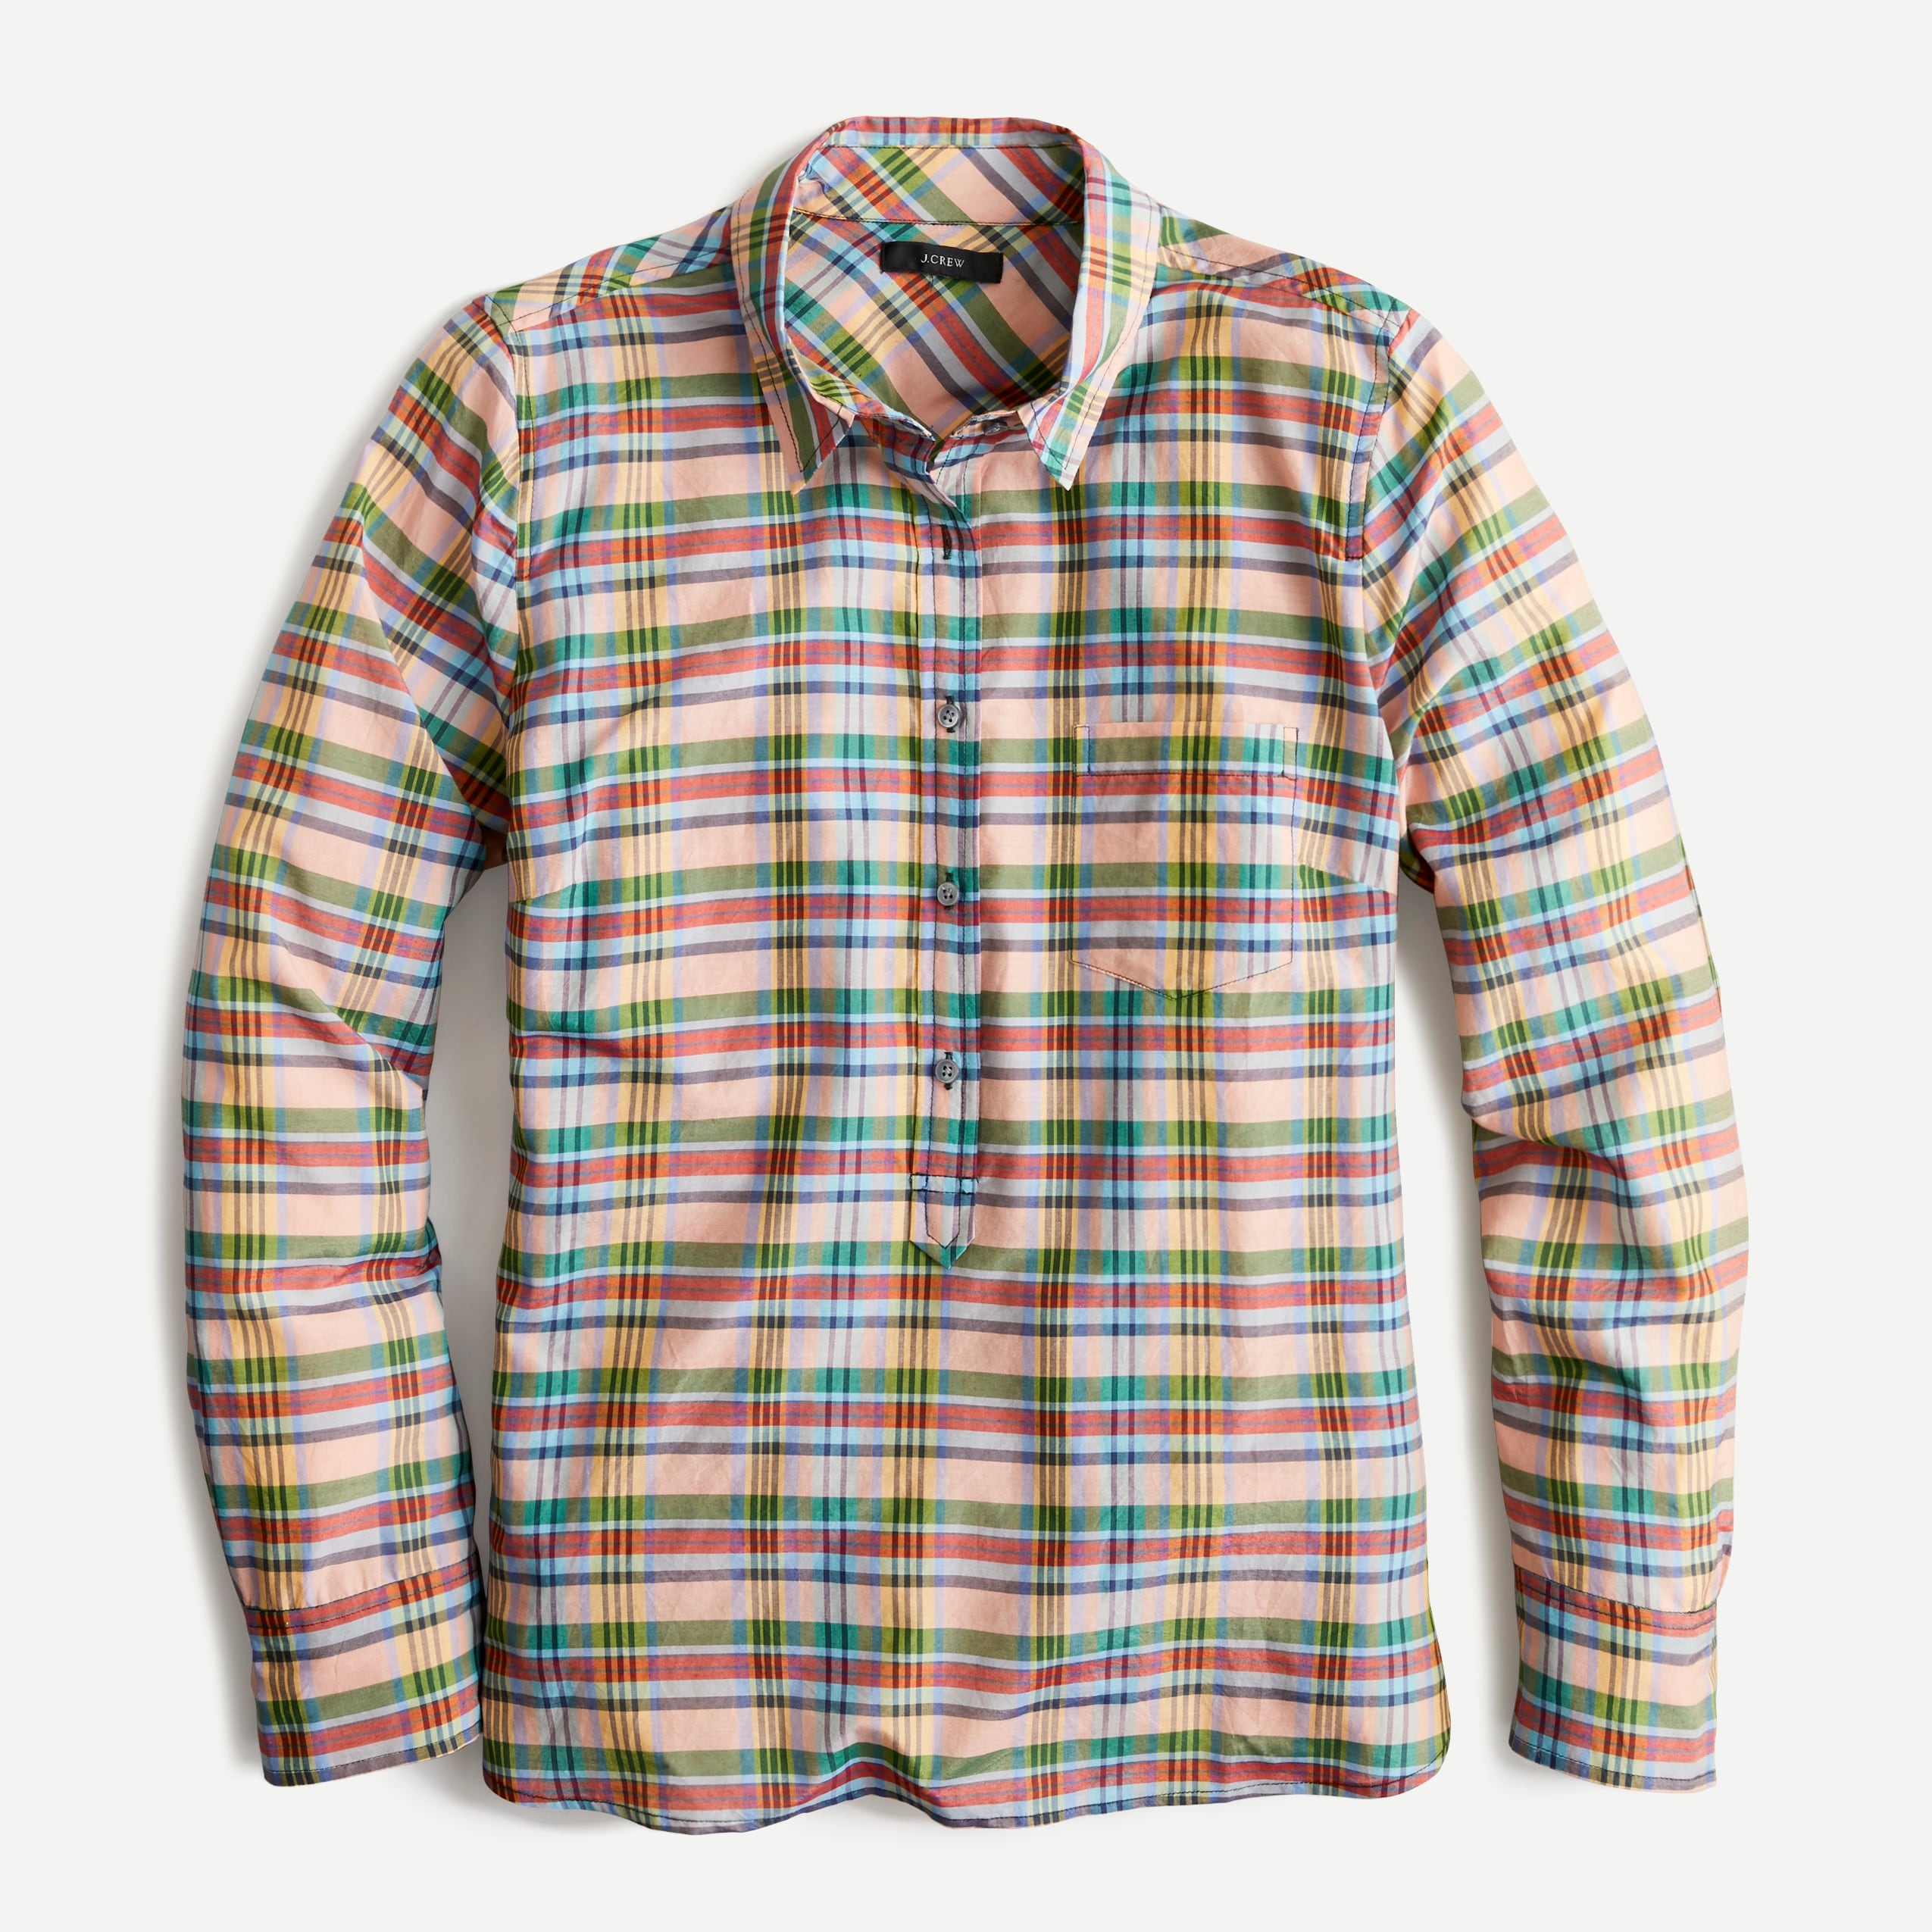 J.Crew: Classic Popover Shirt In Ribbon Plaid For Women